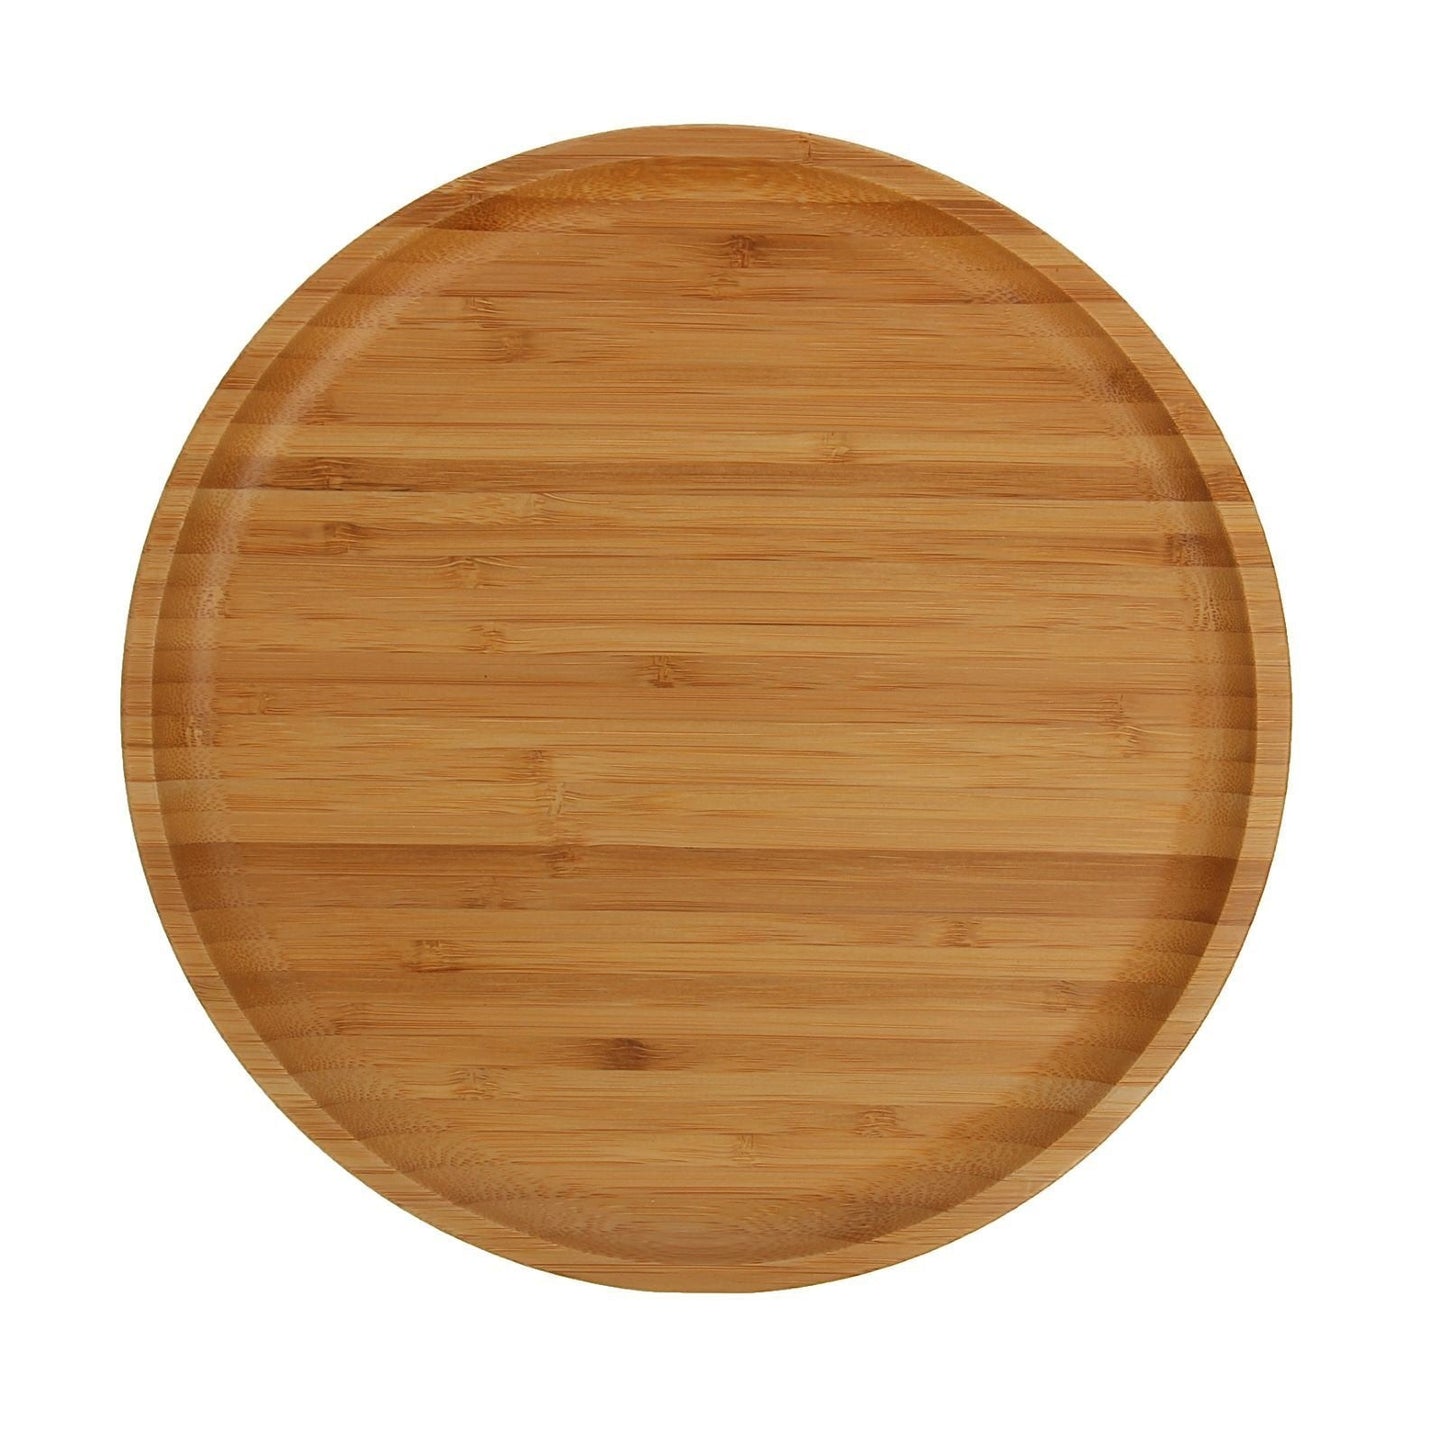 Bamboo Round Plate 11" inch -1